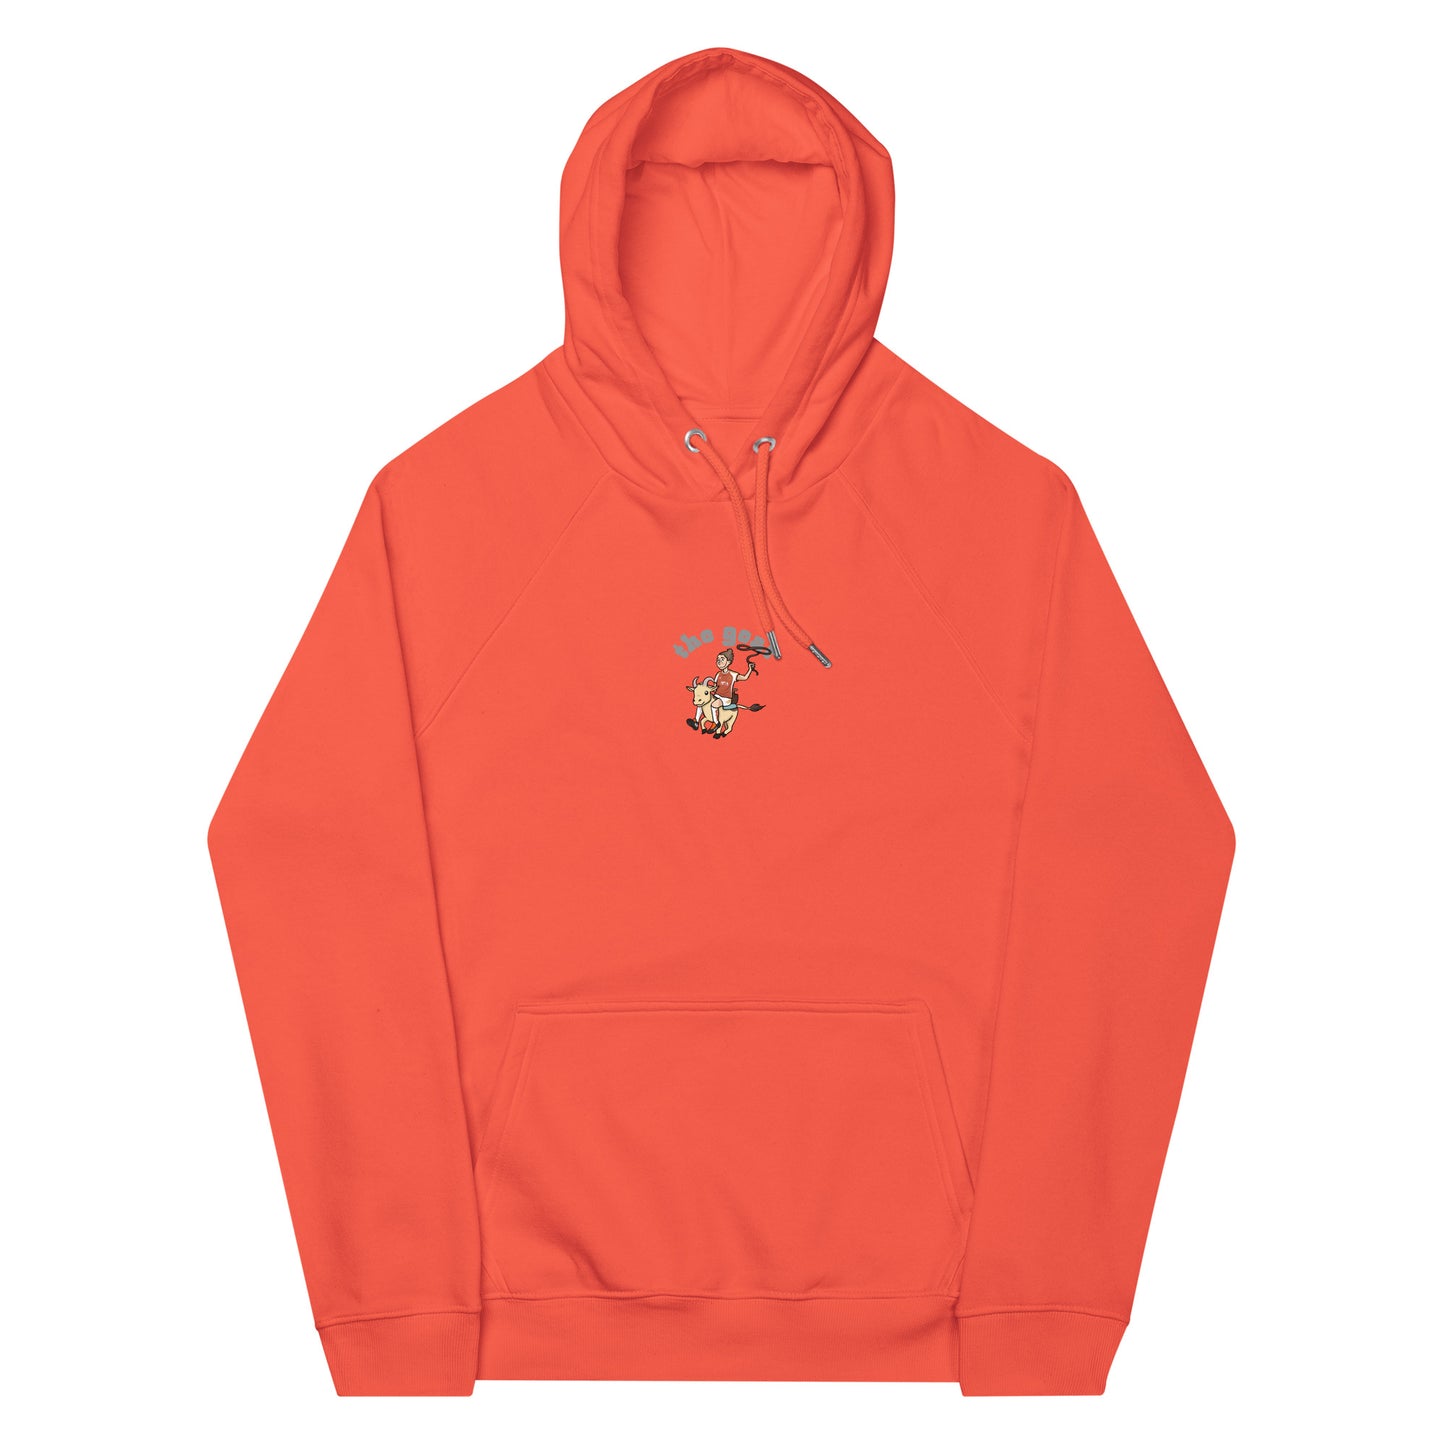 THE GOAT (Eco) HOODIE